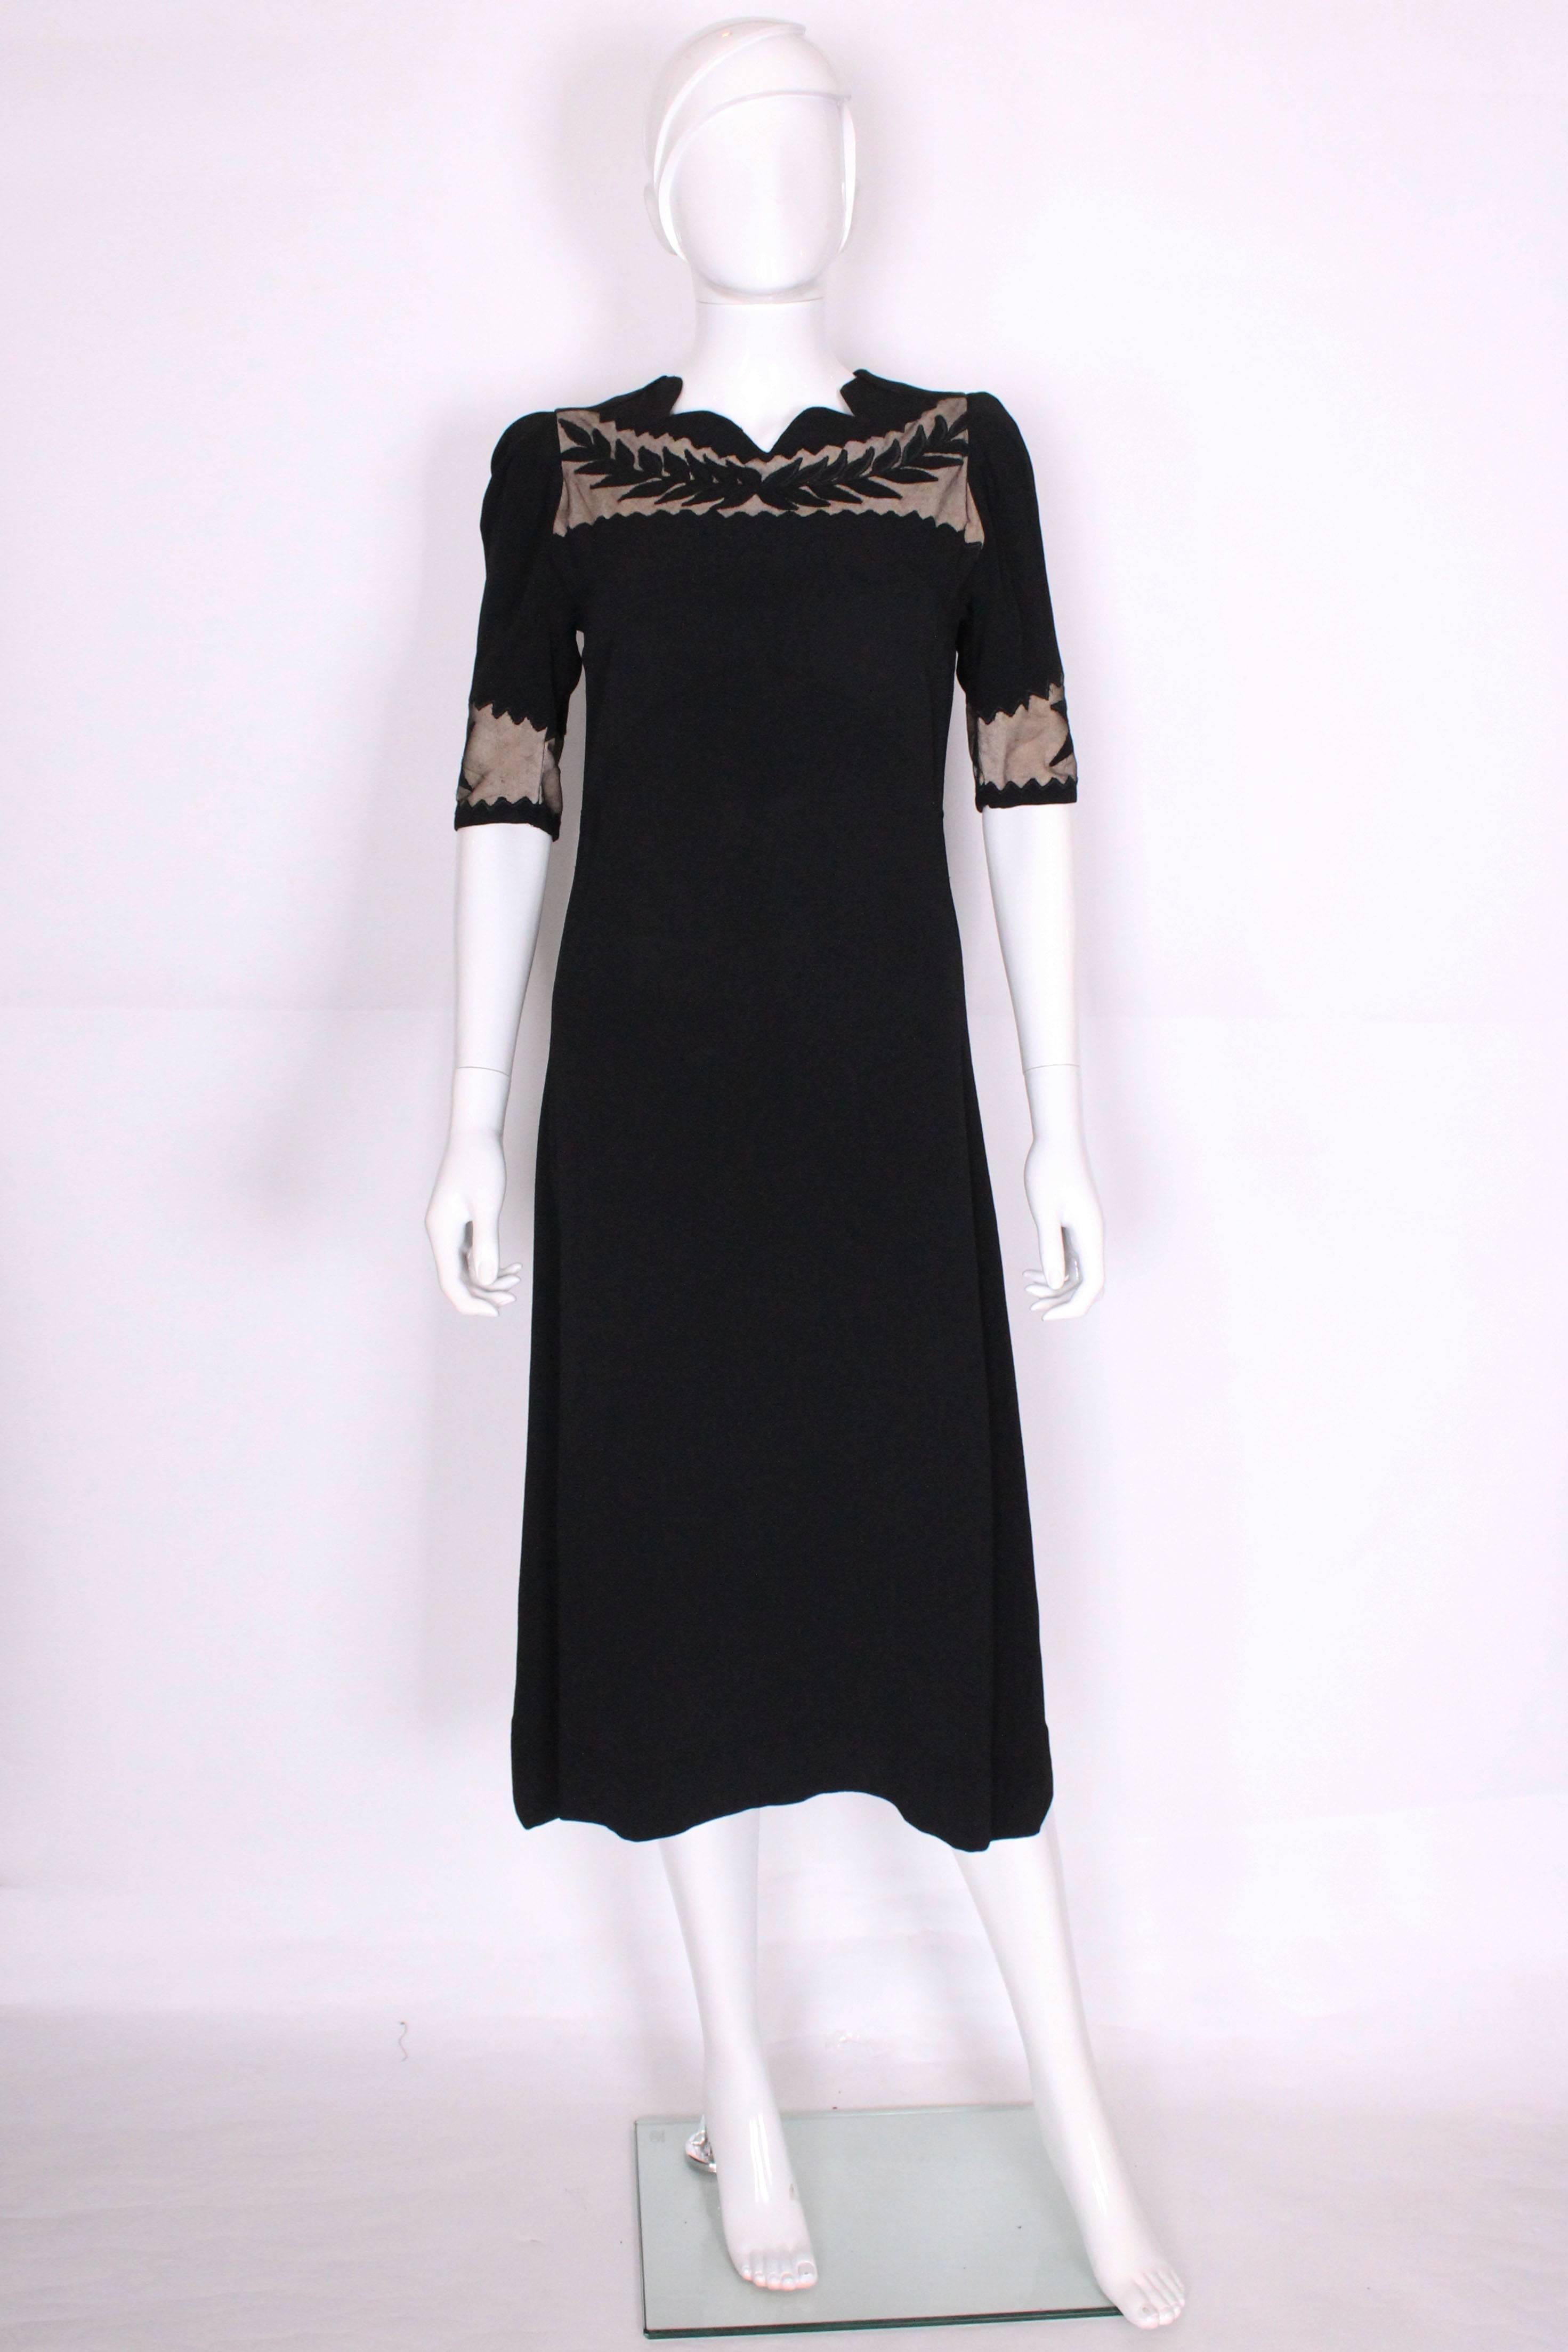 This is a charming and chic dress from the 1940's with some great detailing. It's made of a black crepe with nude coloured fabric in the cutout sections. There are black leaf applique details on top of the nude cutouts on the sleeves and bust. The